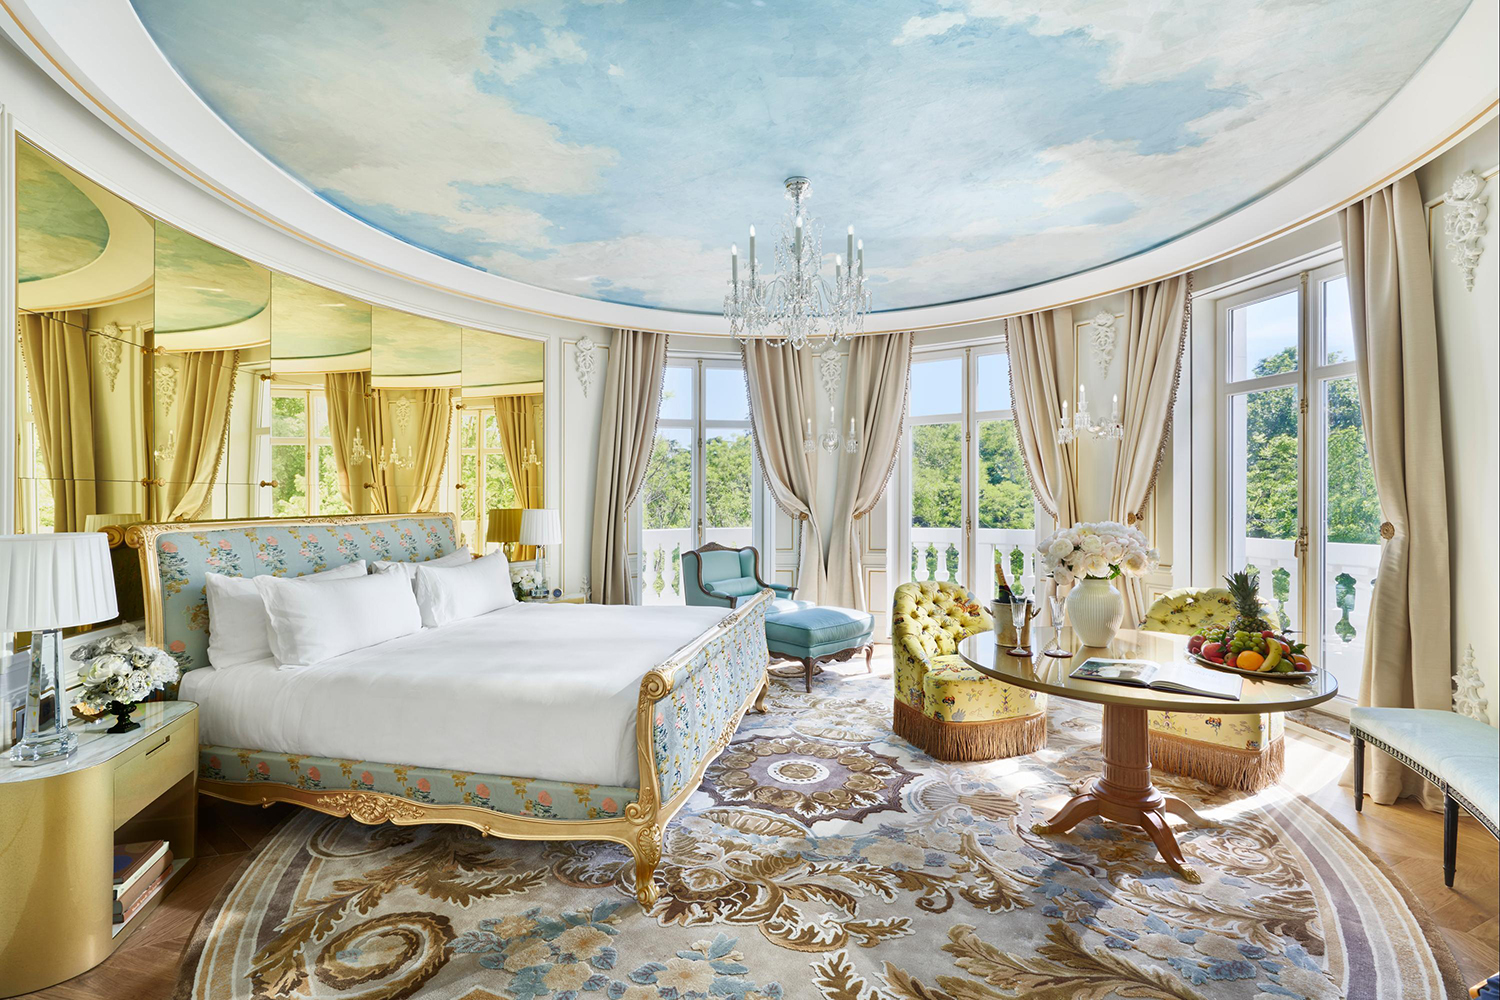 The Belle Epoque style Royal Suite at the Mandarin Oriental Madrid